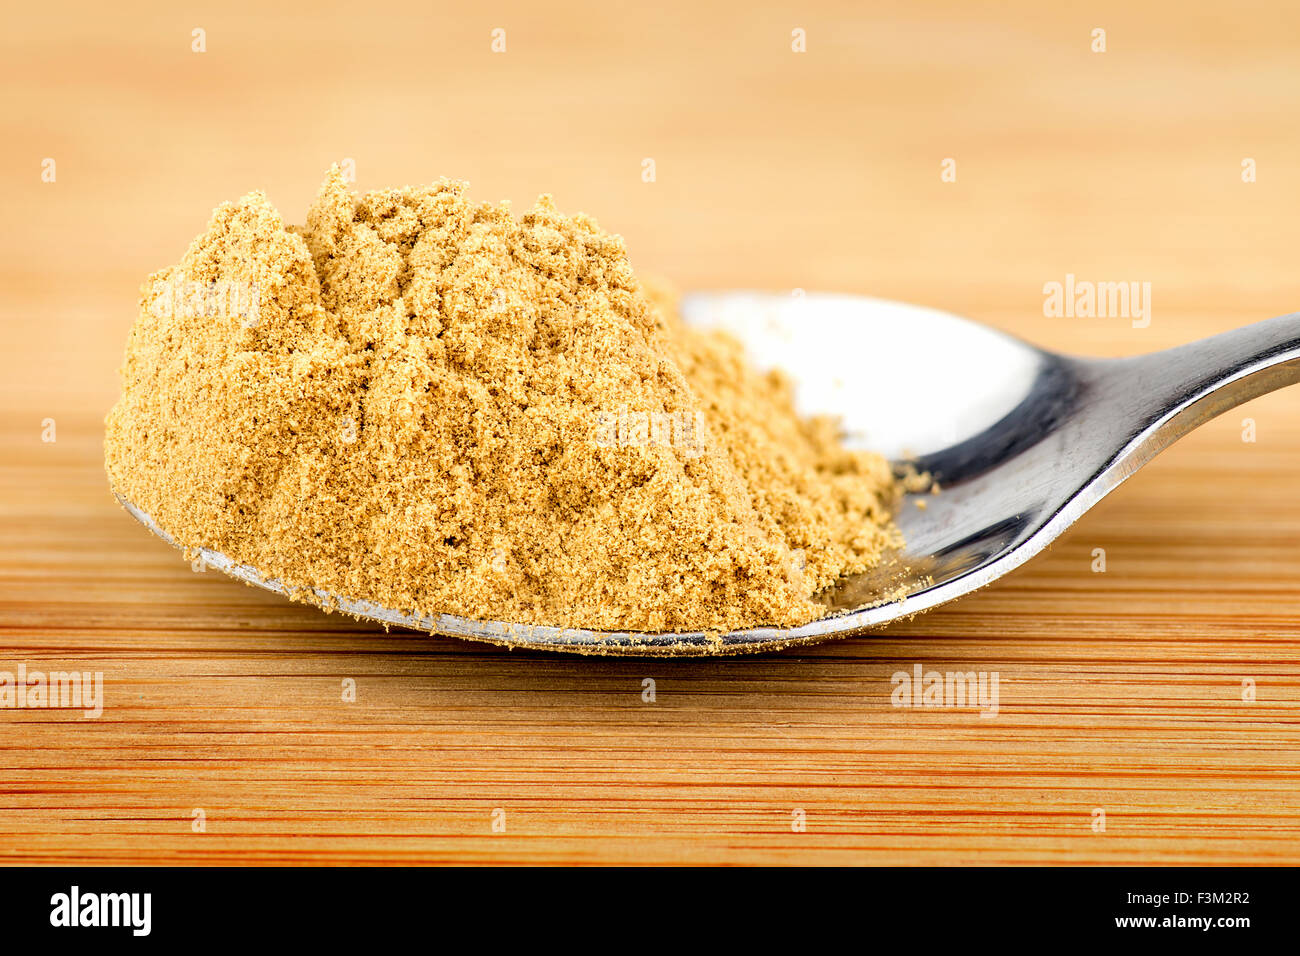 Spoonful of ground ginger powder Stock Photo